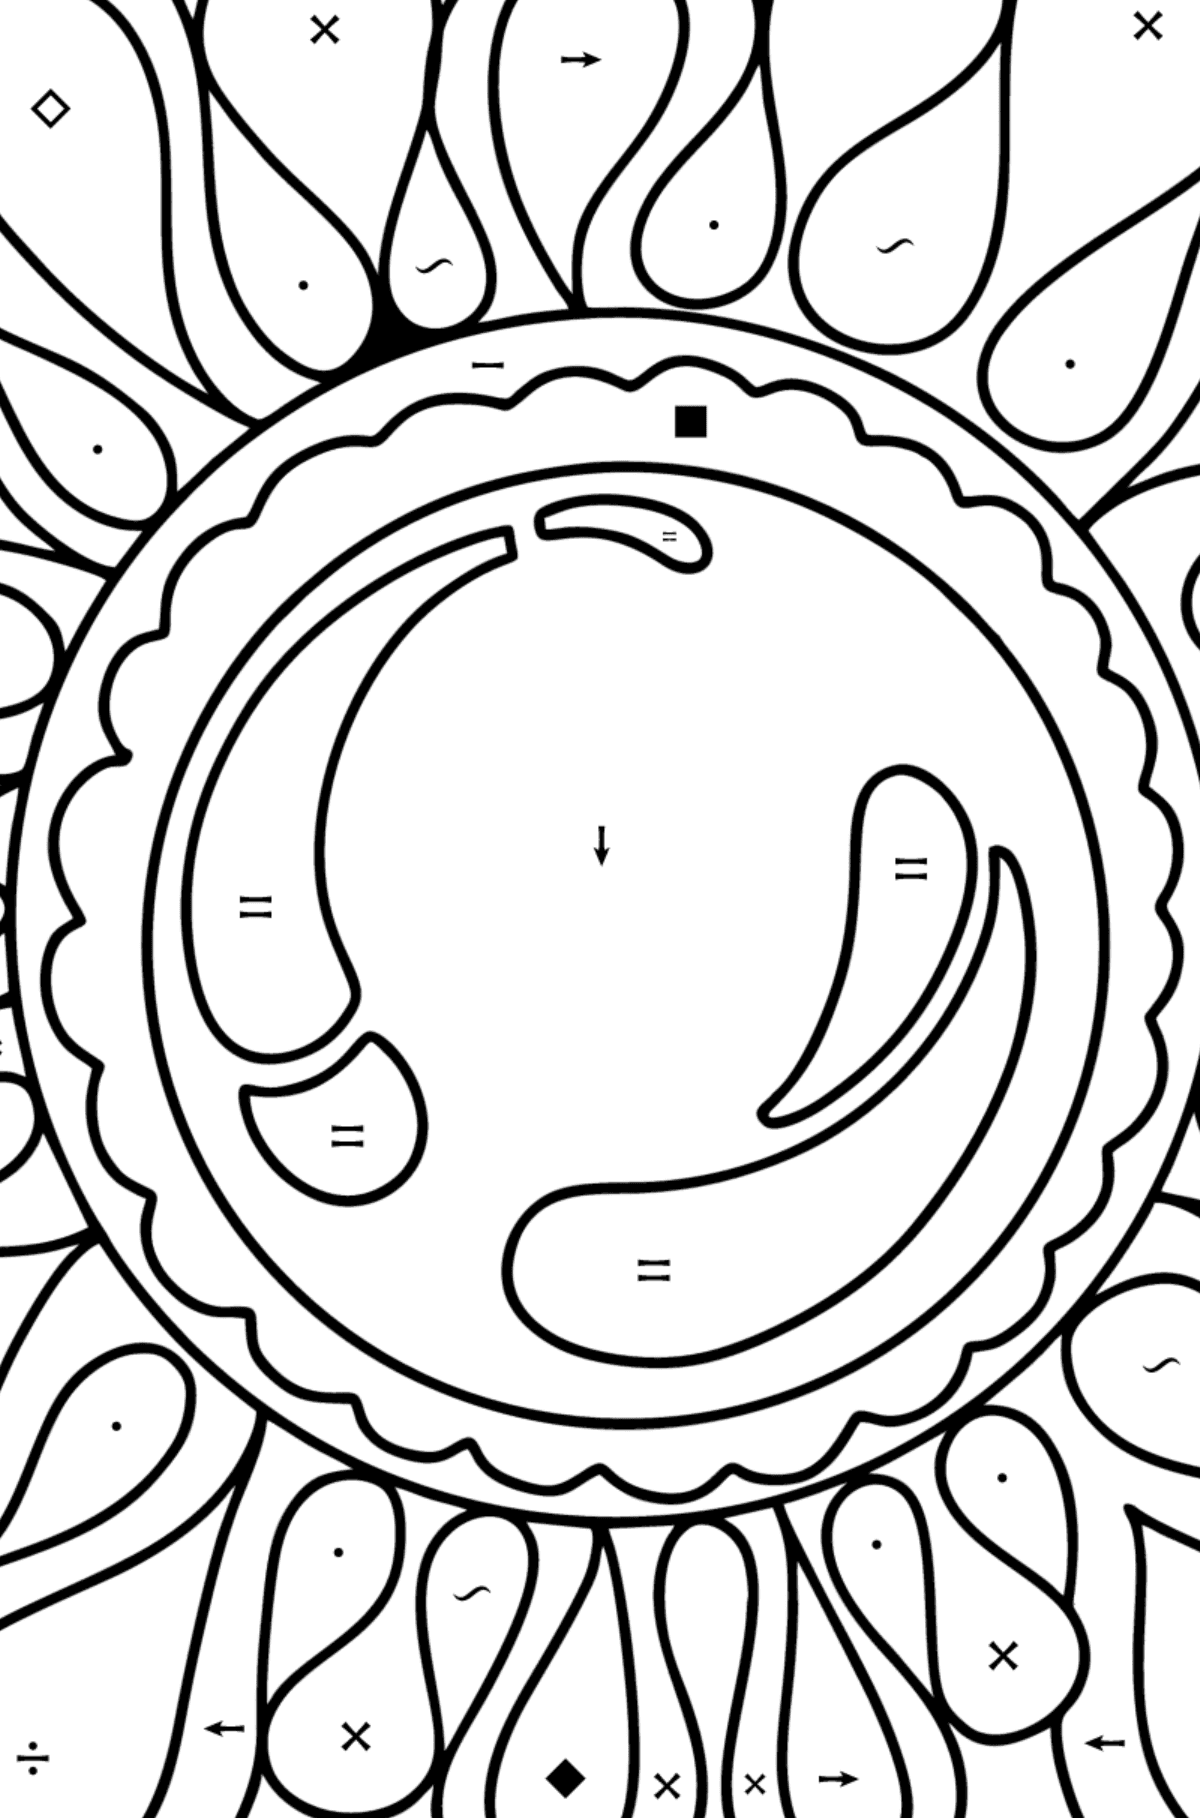 Zentangle Mirror coloring page - Coloring by Symbols for Kids